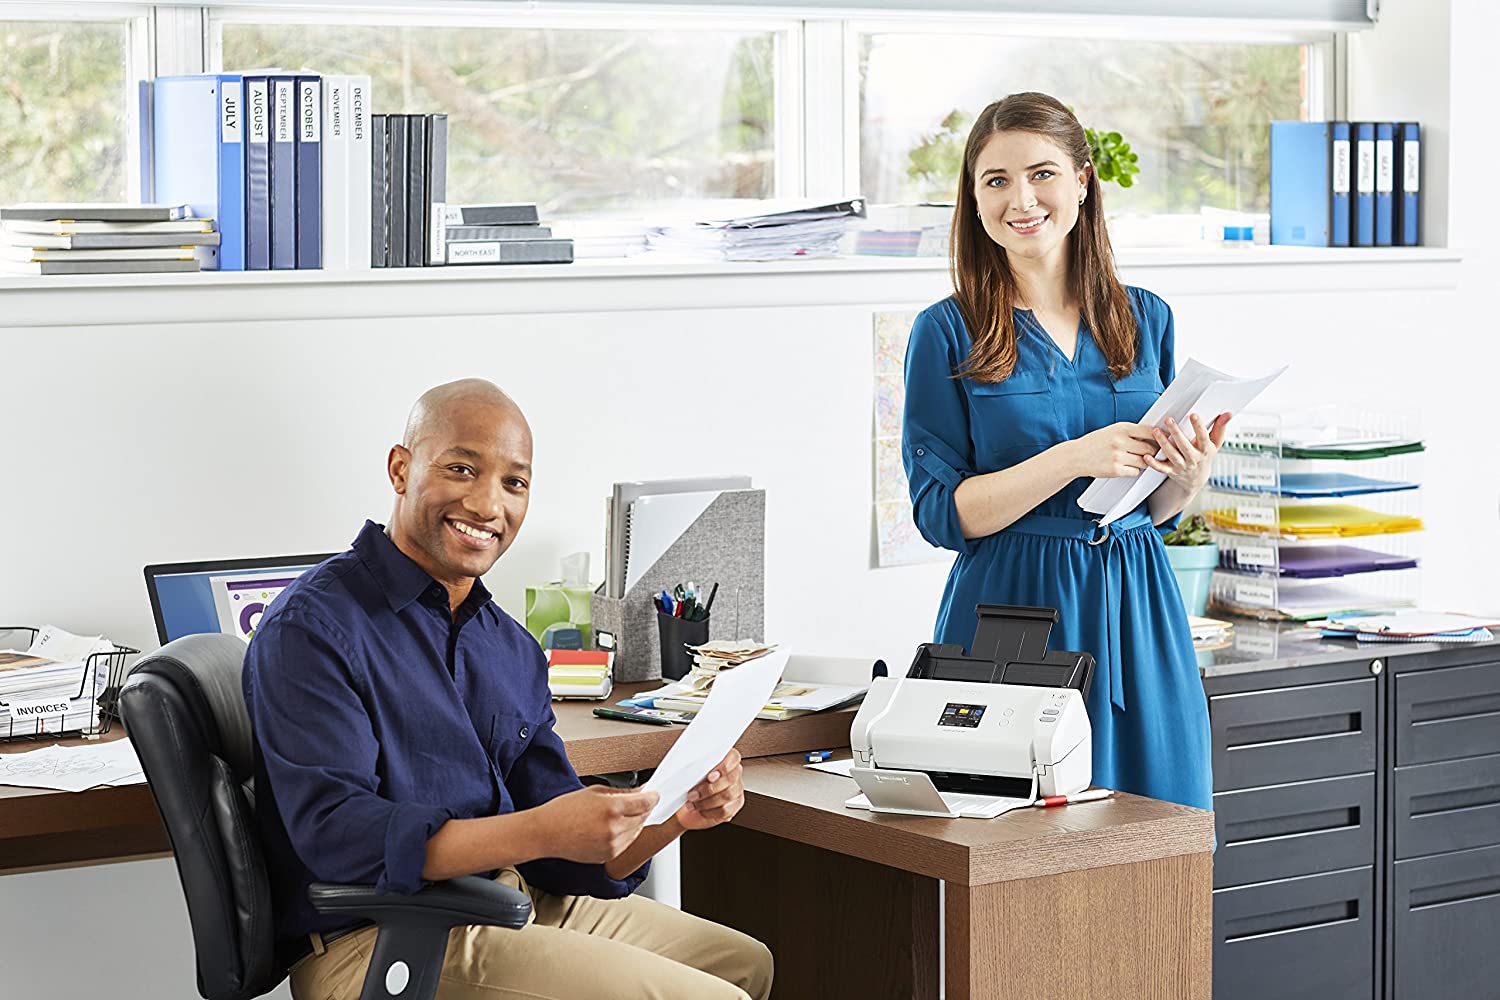 man sitting at a work desk and woman standing, both are smiling and holding sheets of paper